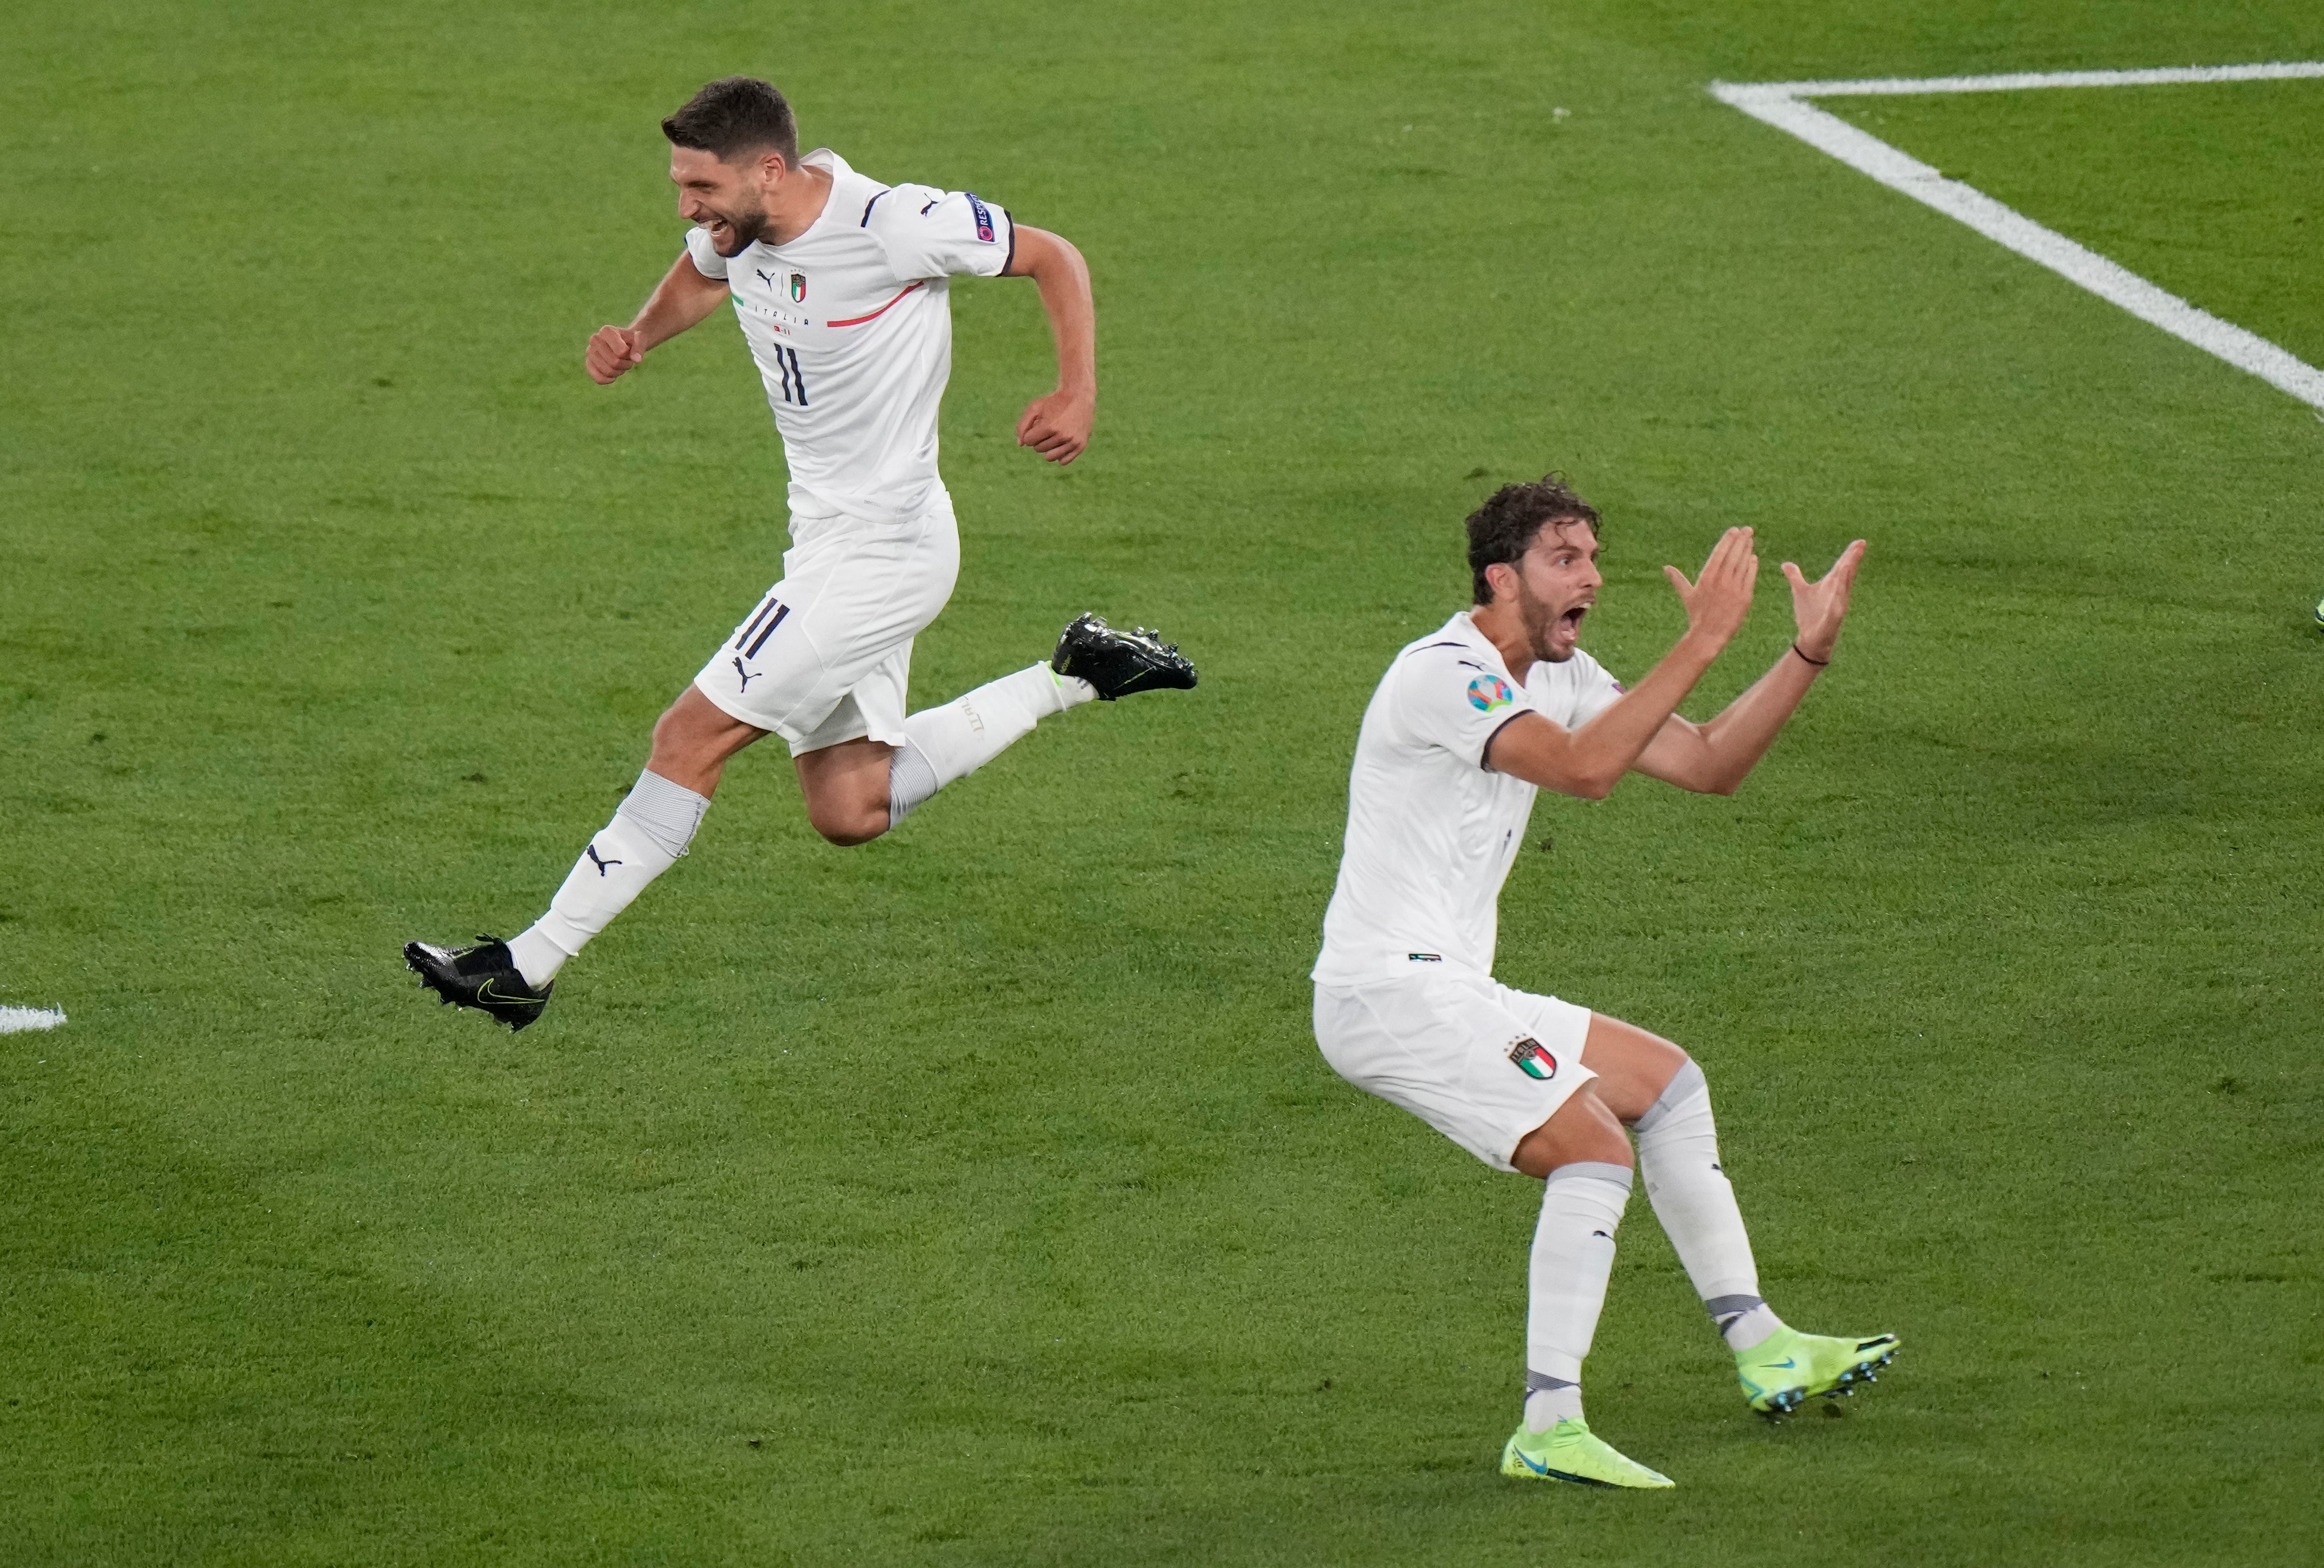 Italy’s Domenico Berardi, left, and Manuel Locatelli celebrate after Turkey’s Merih Demiral diverted the ball into his own net for the opening goal of Euro 2020